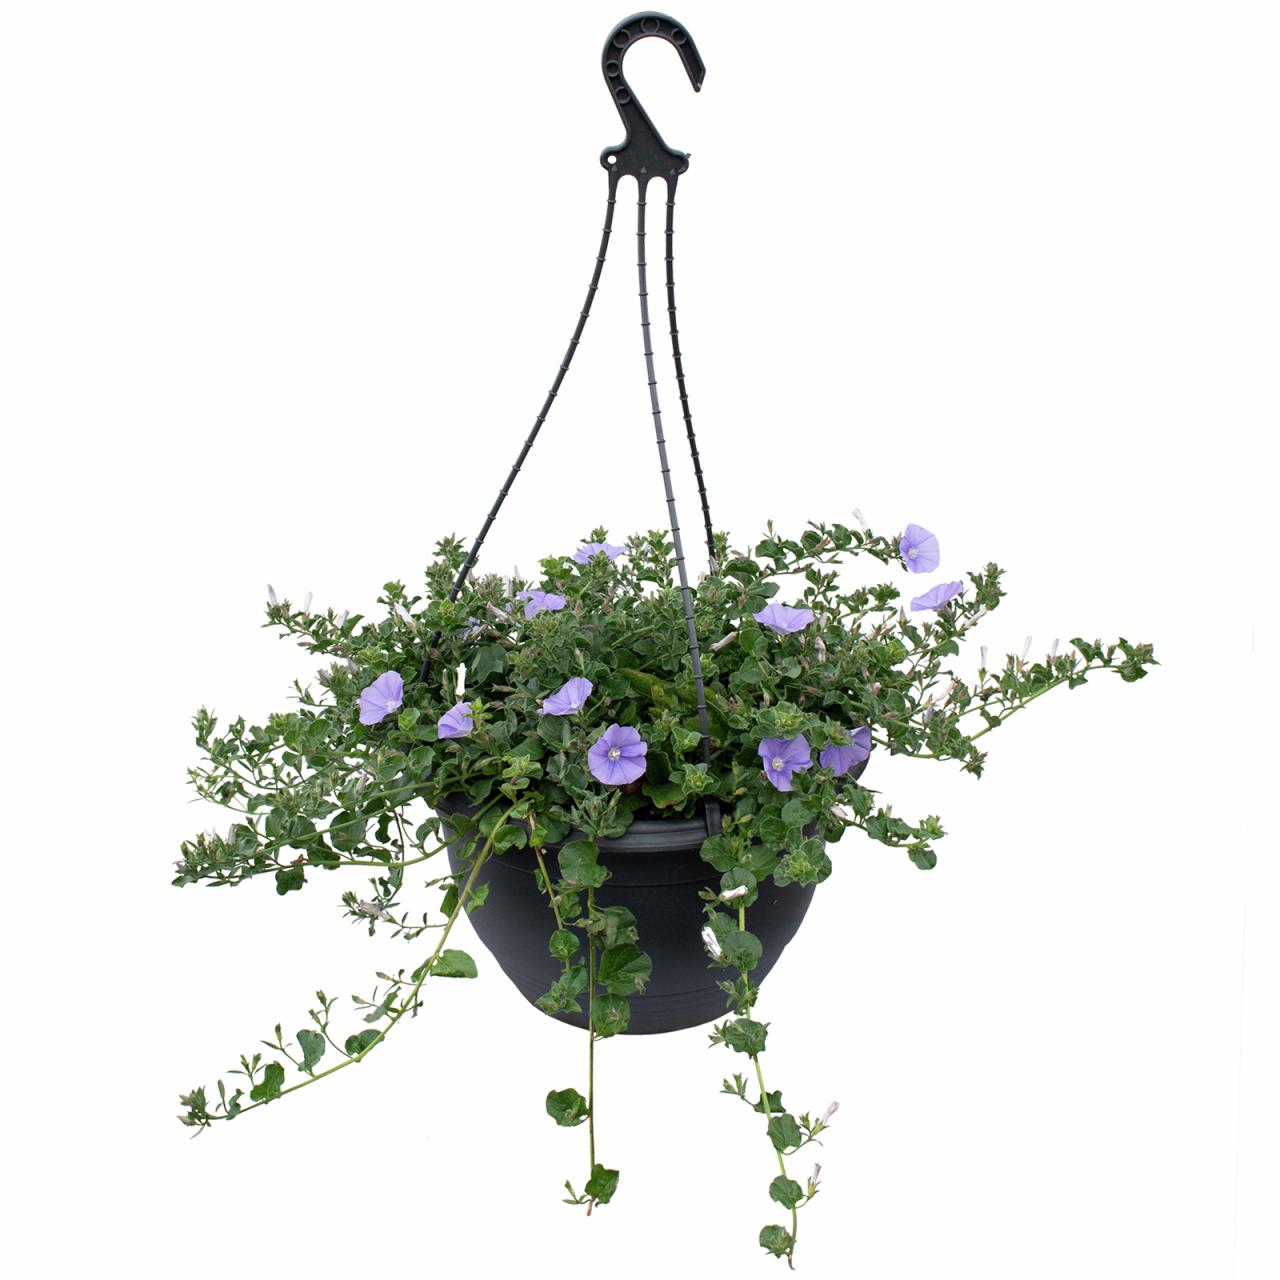 Hanging Plants Indoor | Hanging Pot Plants from Bunnings: A Comprehensive Guide